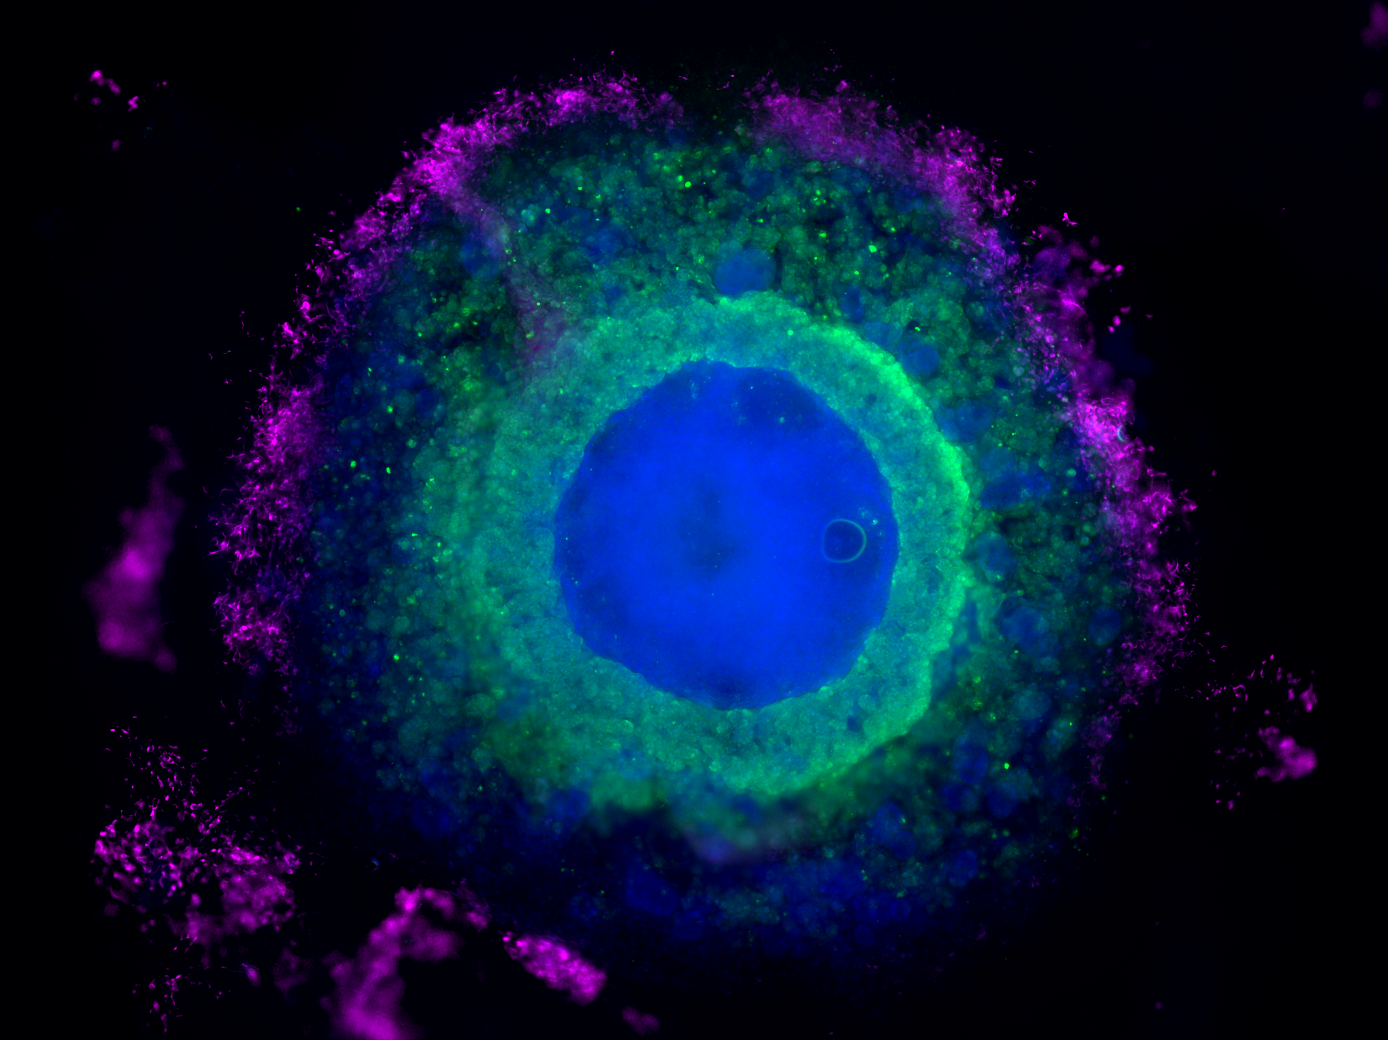 heart-forming organoids from human pluripotent stem cells